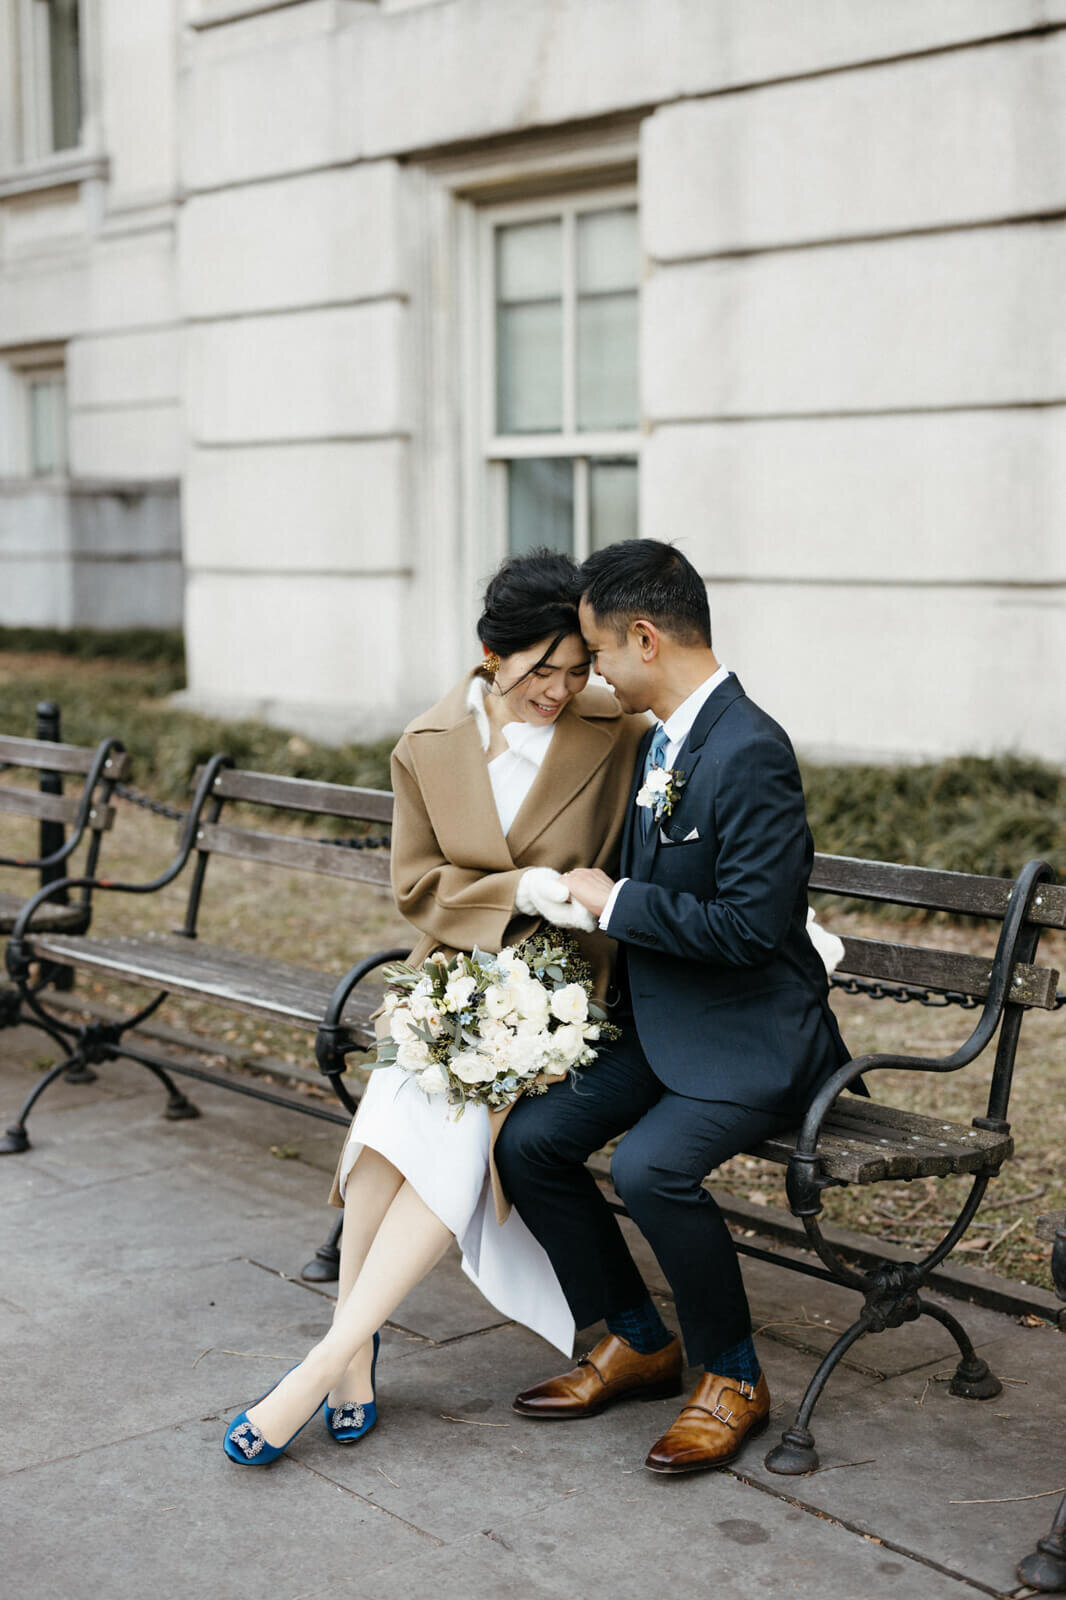 The bride and the groom are sitting closely together, touching heads, on a bench outside of a building.